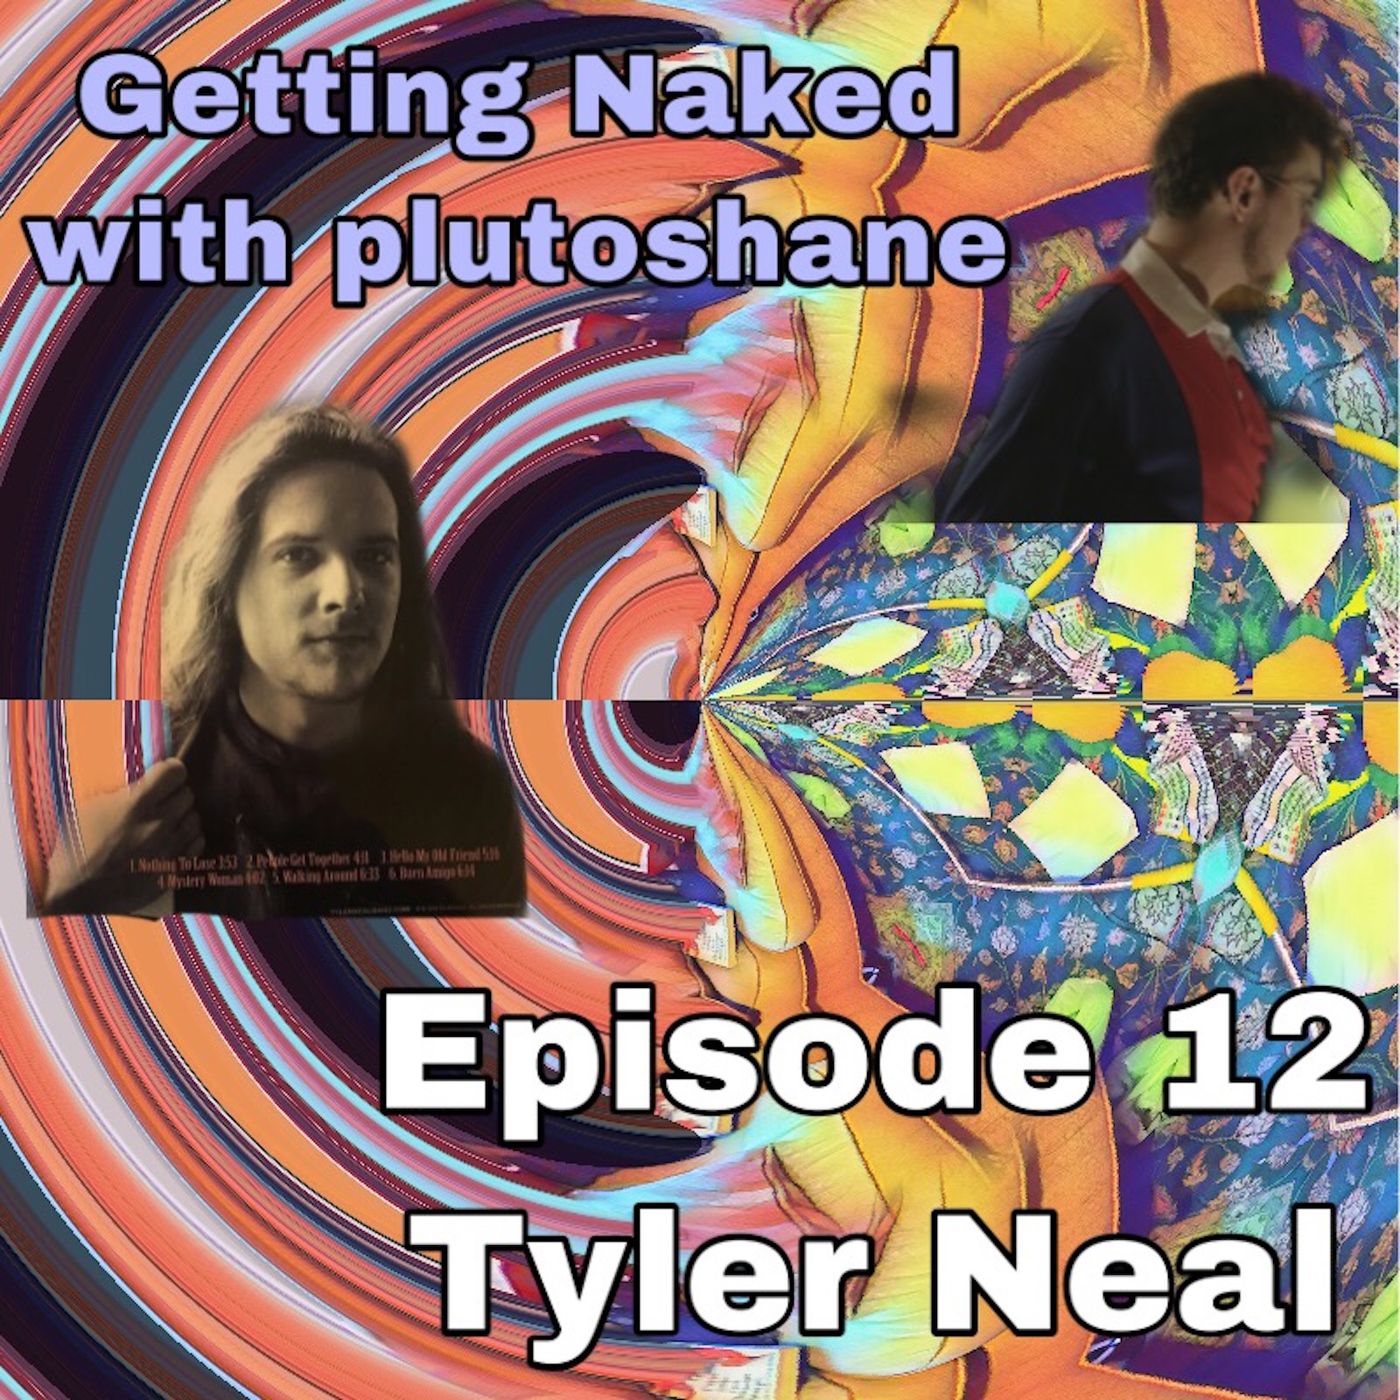 Tyler Neal Has Nothing to Lose (GN w/ plutoshane Ep. 12)